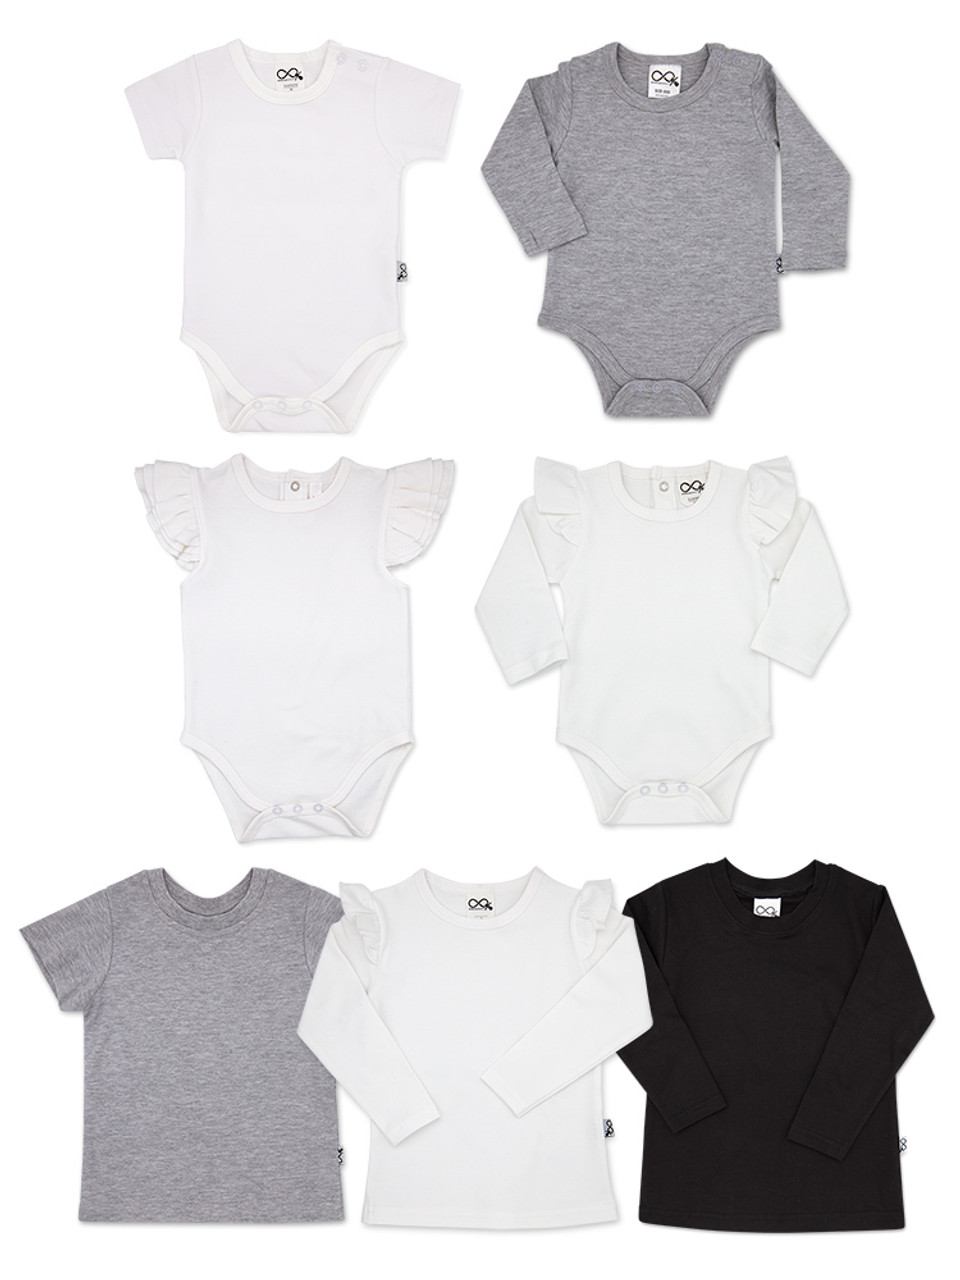 7 styles available - Short Sleeve Onesies, Long Sleeve Onesies, Sleeveless Frill Onesie, Long Sleeve Frill Onesie, Short Sleeve T-shirt, Long Sleeve T-shirt, Long Sleeve Frill T-shirt